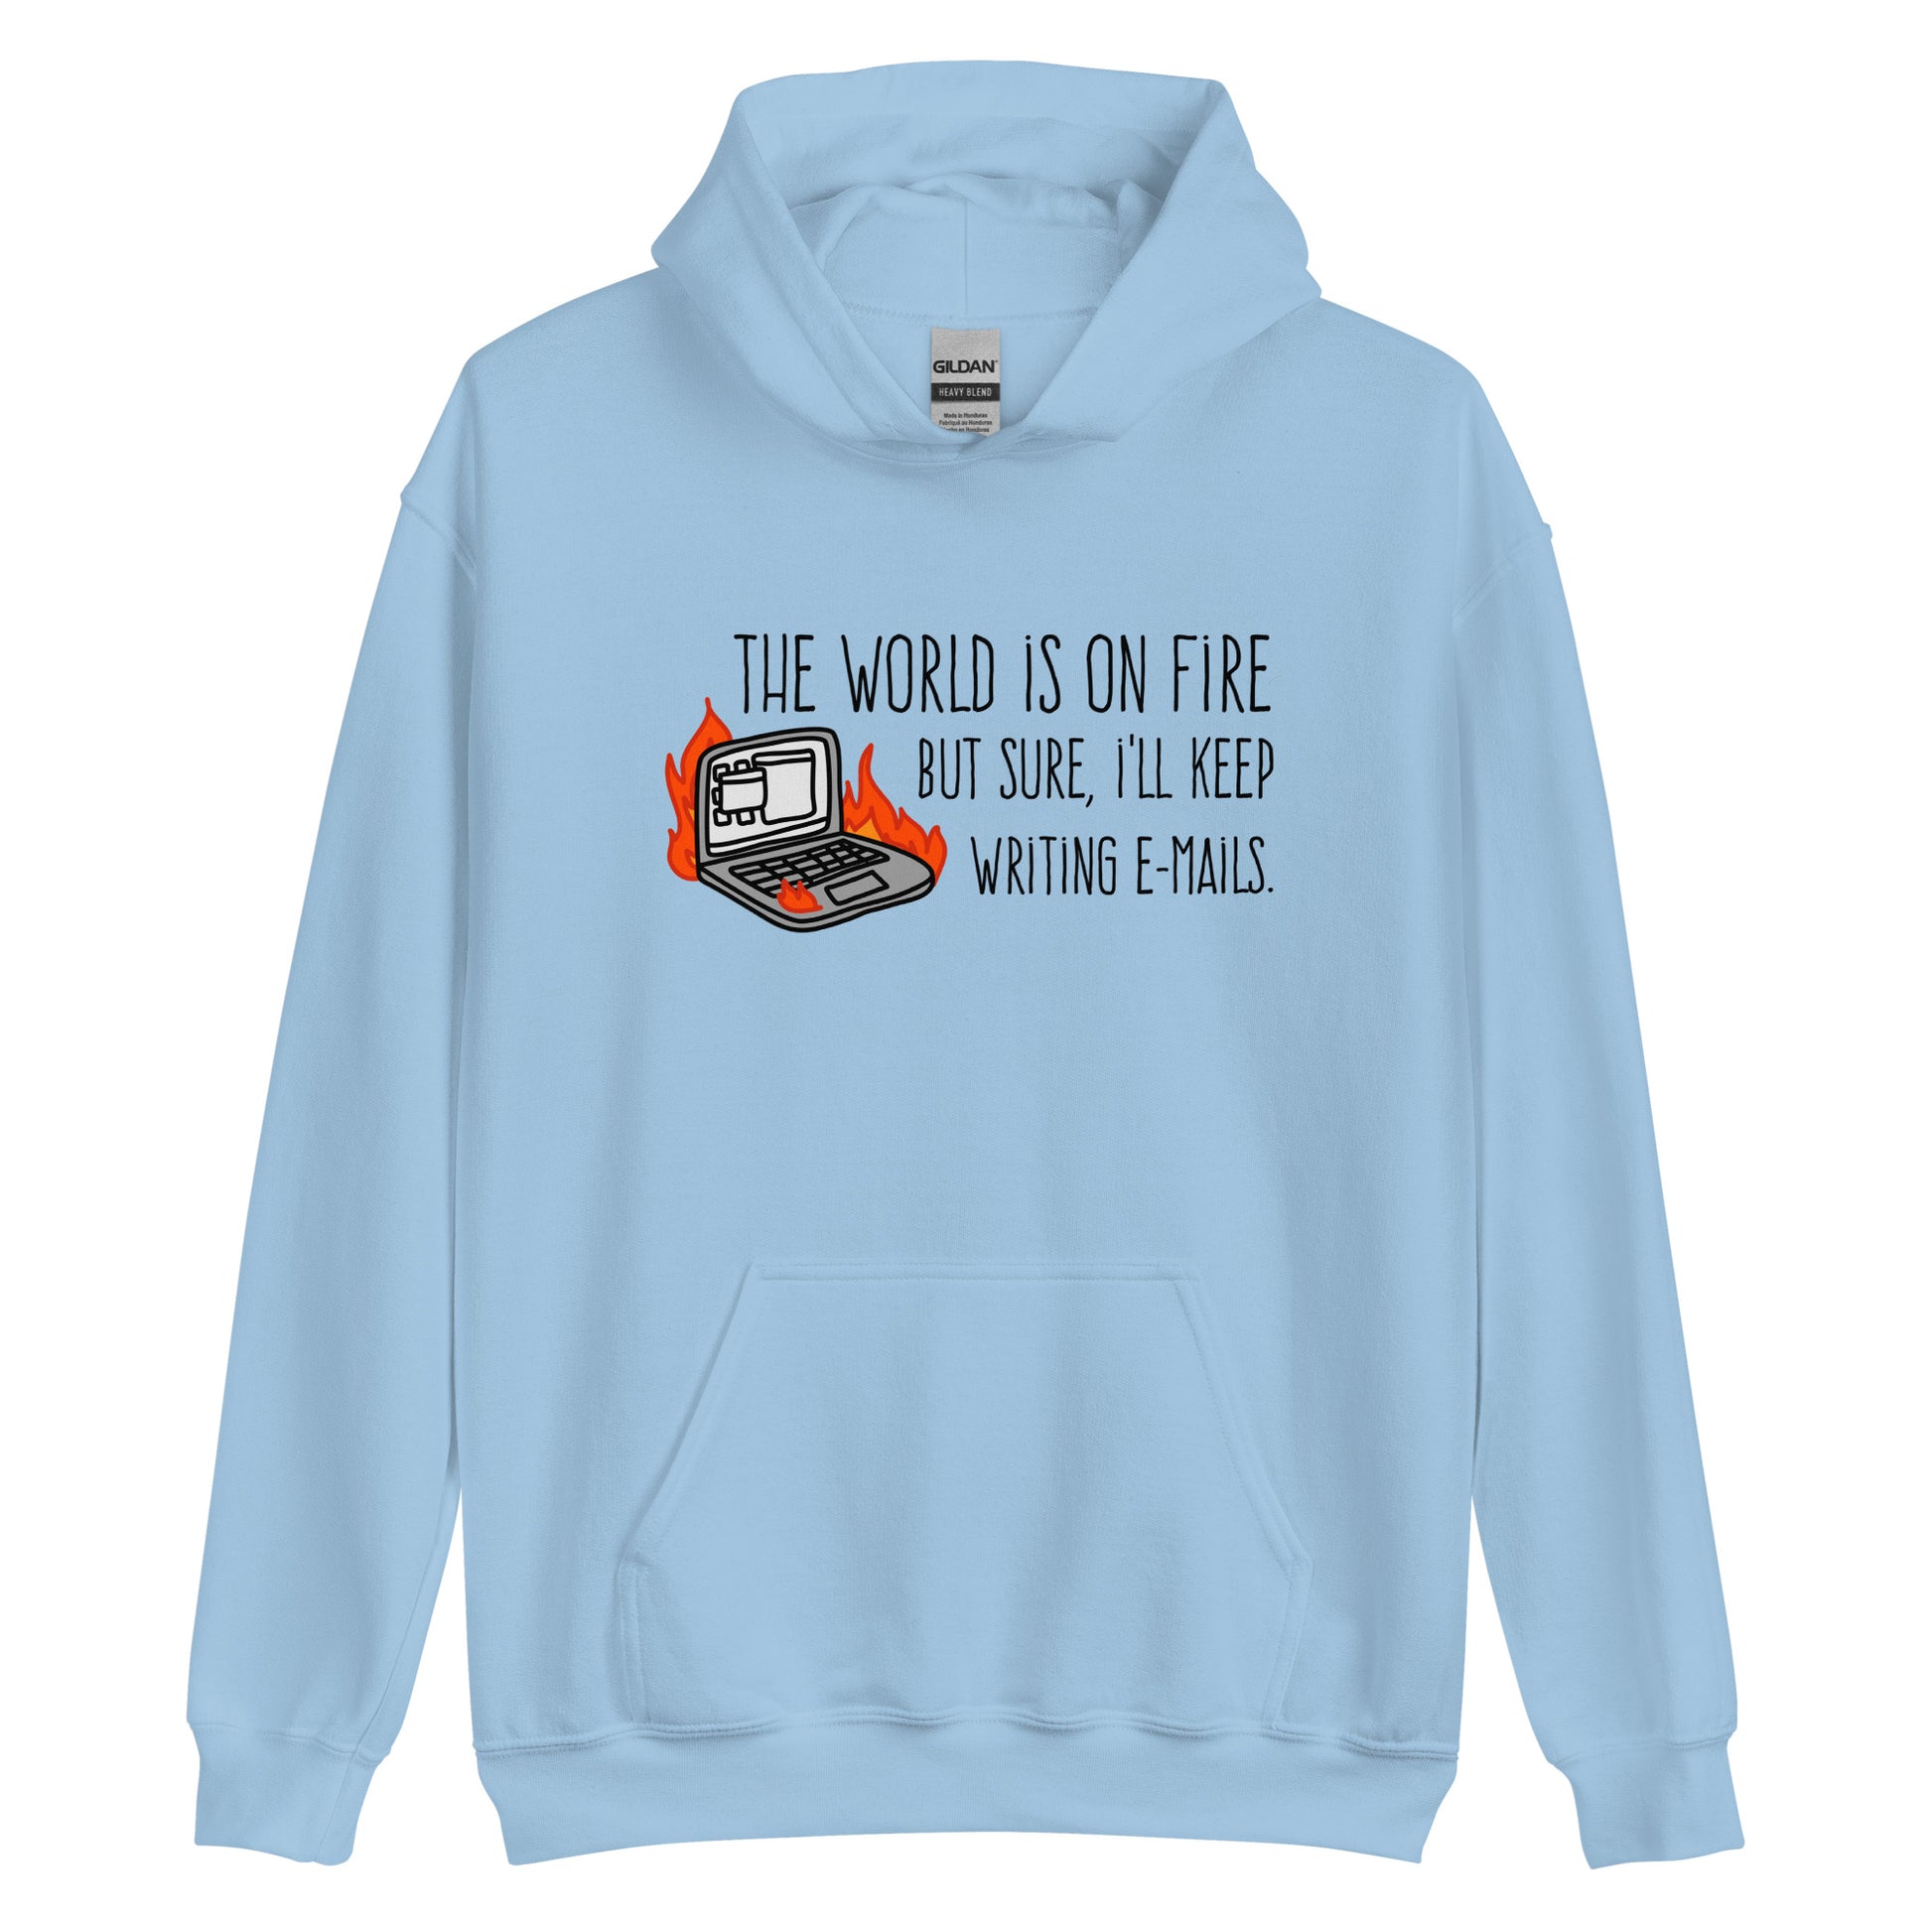 A light blue hooded sweatshirt featuring a squiggly illustration of a laptop that is on fire. Text alongside the laptop reads "the world is on fire but sure, I'll keep writing e-mails."